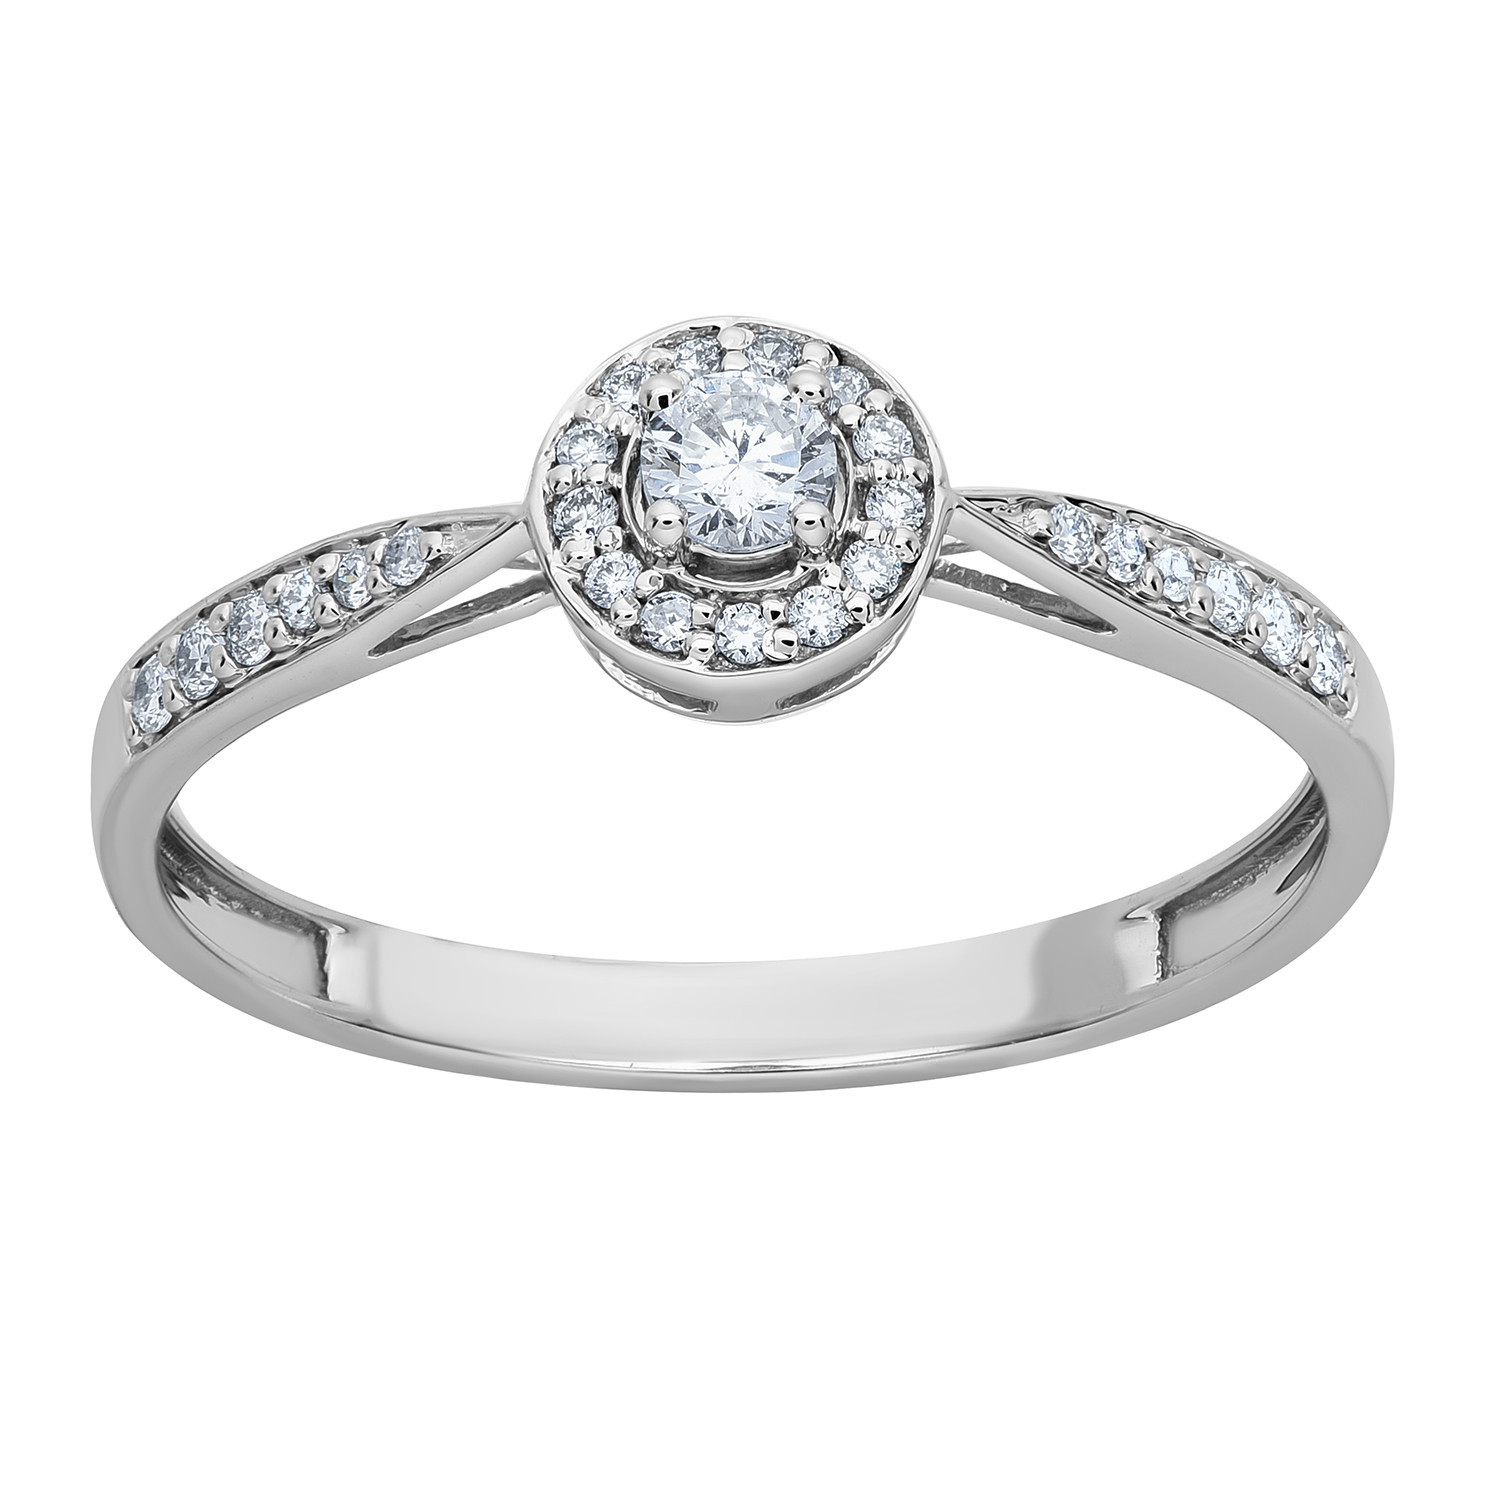 Solitaire accompagné or blanc 18 carats diamants